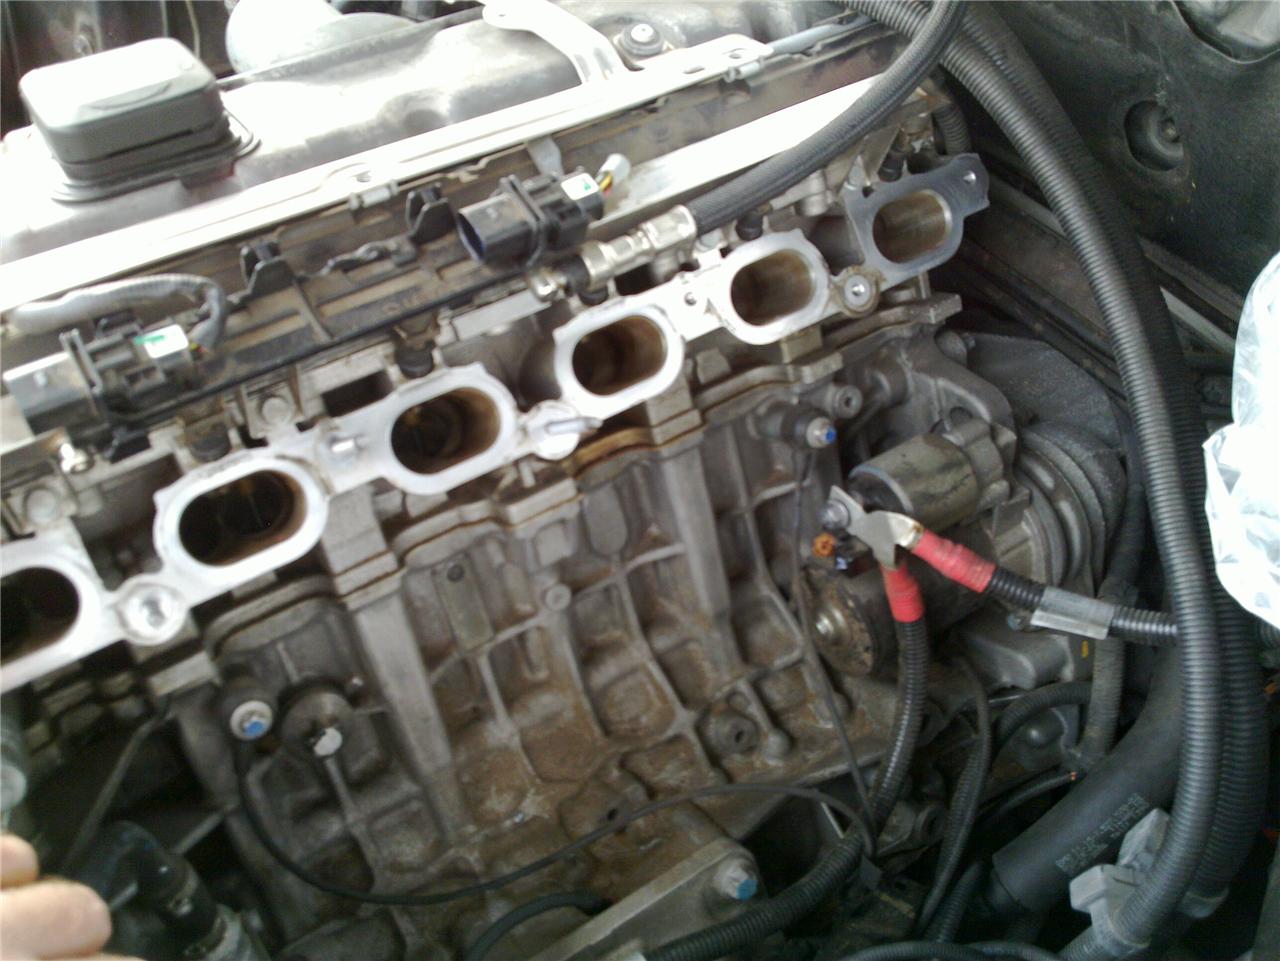 N52 RPM bounces on cold start - 5Series.net - Forums 2006 bmw 530xi fuse diagram 